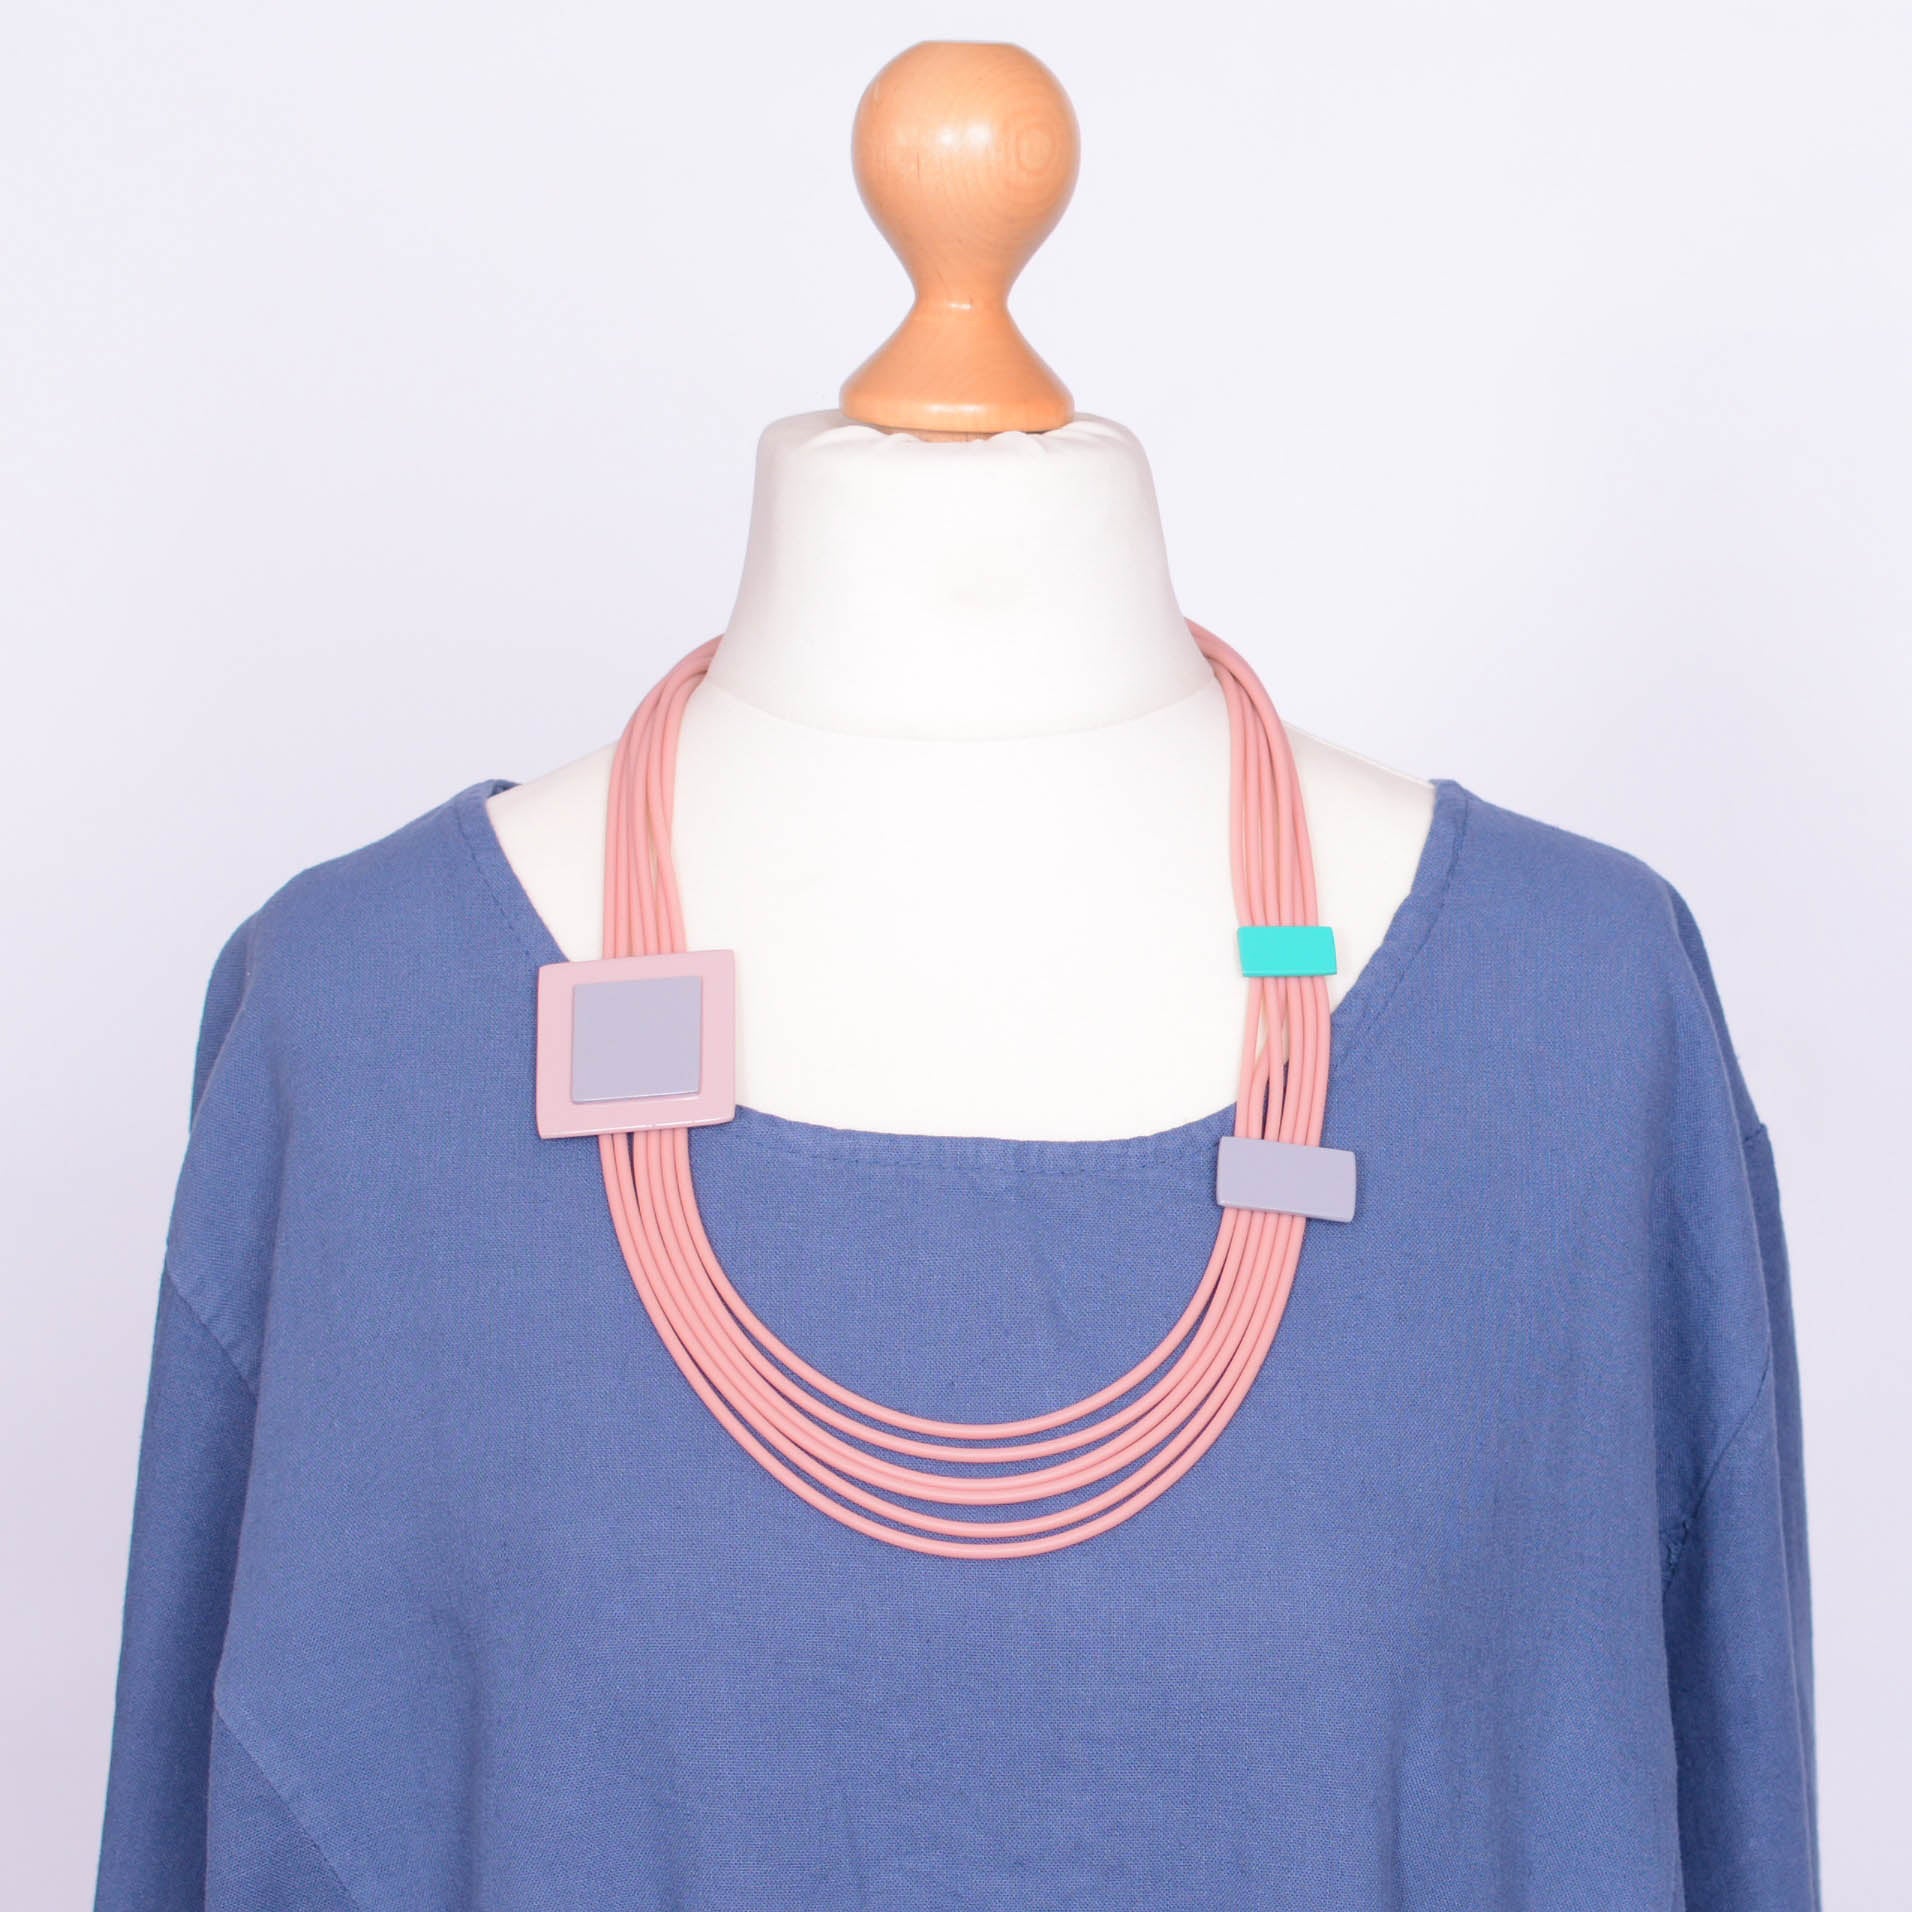 Necklace - PINK - Model 20, Necklaces & Pendants, Pure Plus Clothing, Lagenlook Clothing, Plus Size Fashion, Over 50 Fashion